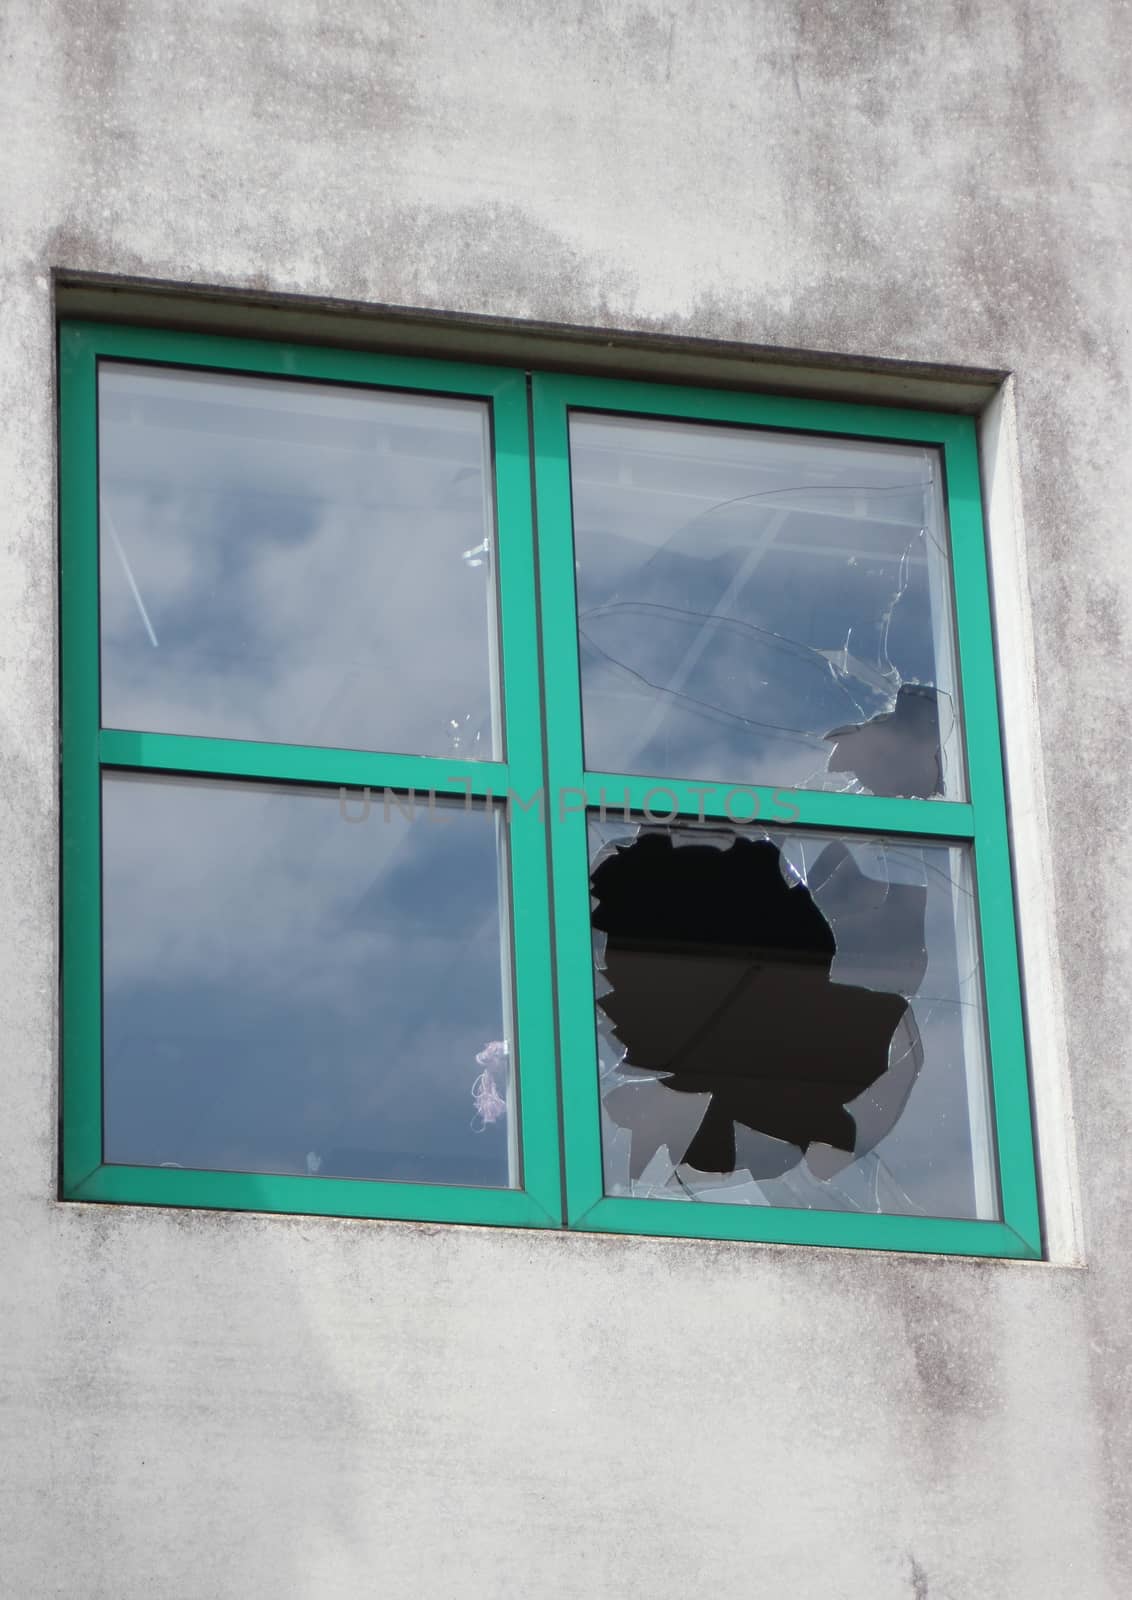 Broken glass in window with green frame at  factory